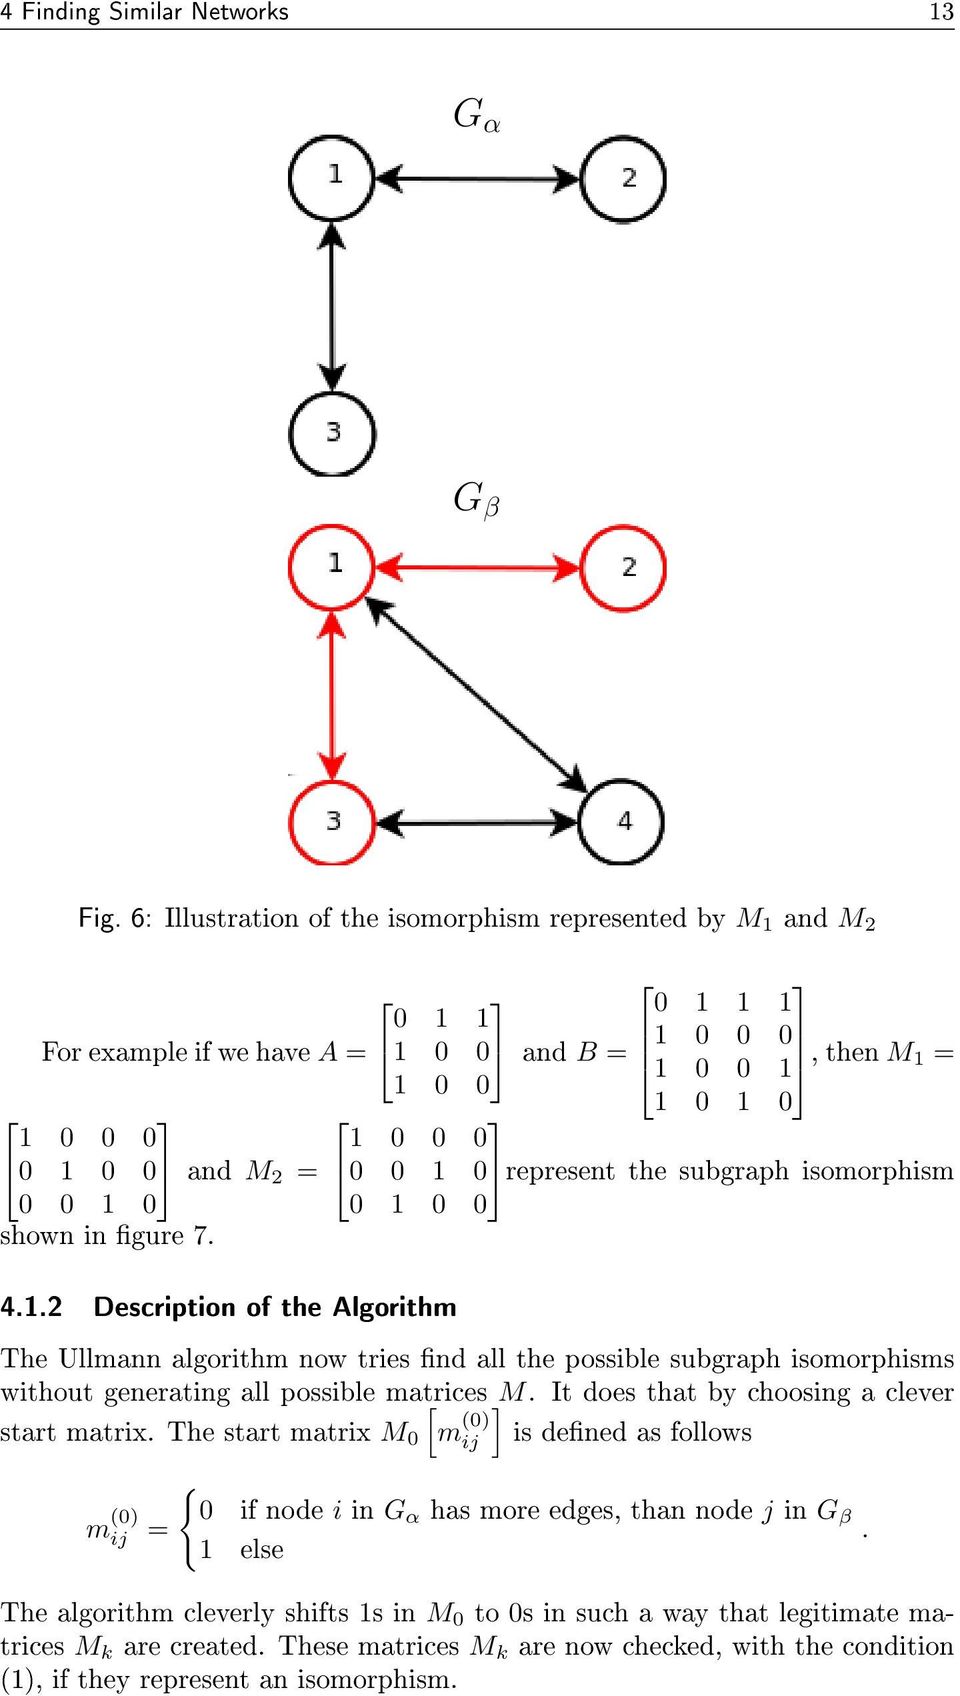 0 represent the subgraph isomorphism 0 0 1 0 0 1 0 0 shown in gure 7. 4.1.2 Description of the Algorithm The Ullmann algorithm now tries nd all the possible subgraph isomorphisms without generating all possible matrices [ ] M.